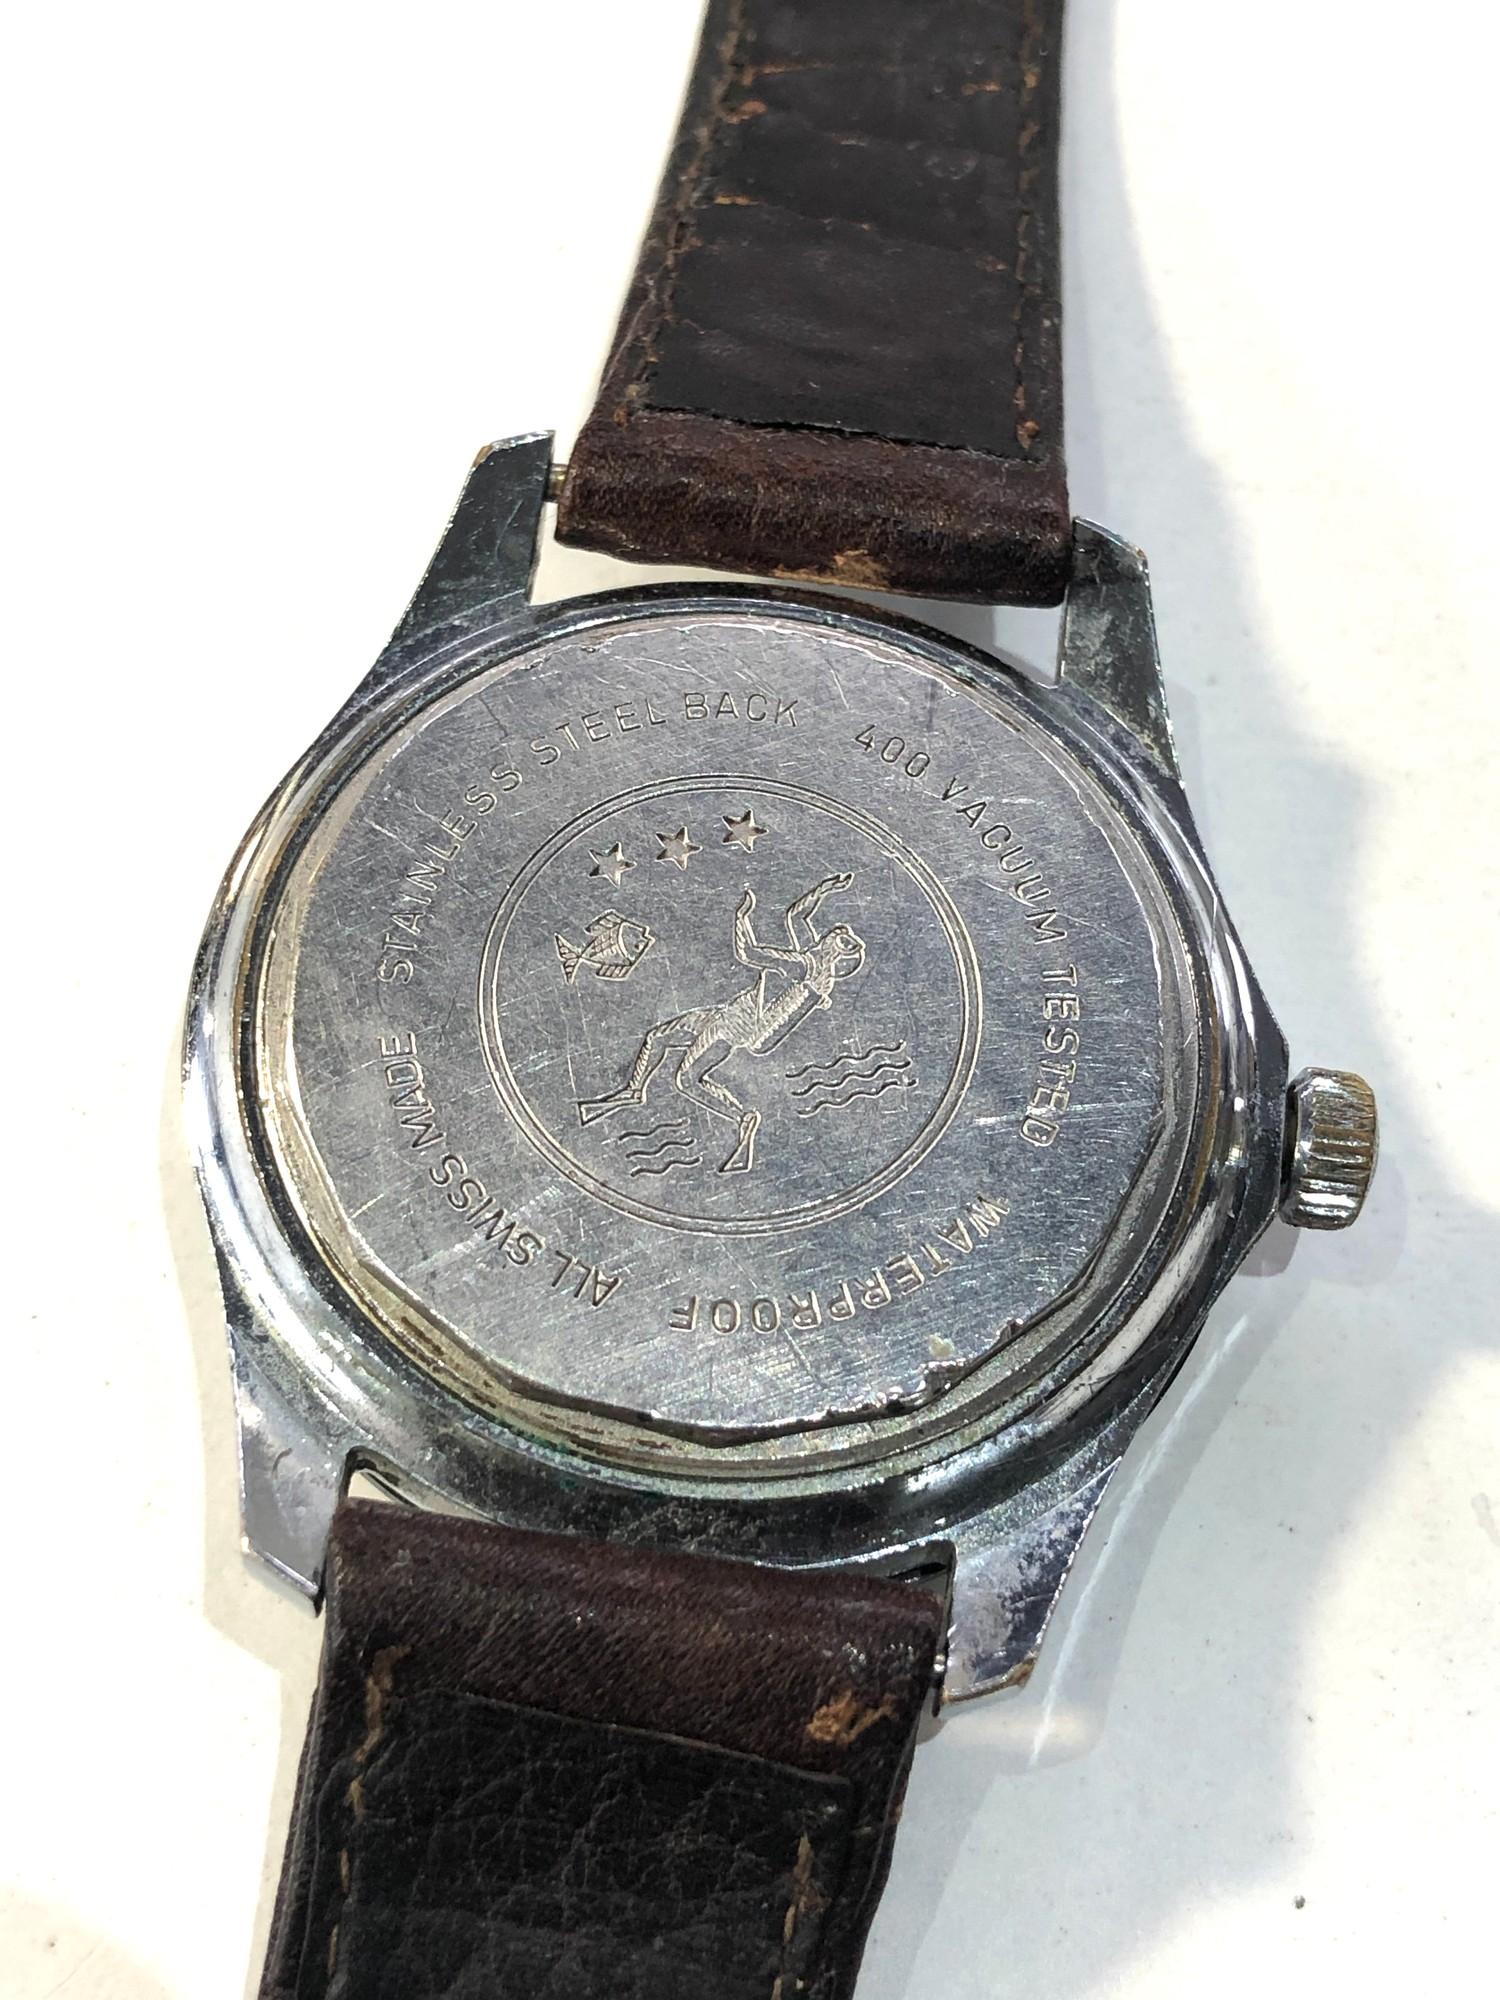 Vintage Cardinal (sic / breitling) 23 jewel apollo 400 diver watch watch is ticking but no - Image 4 of 4